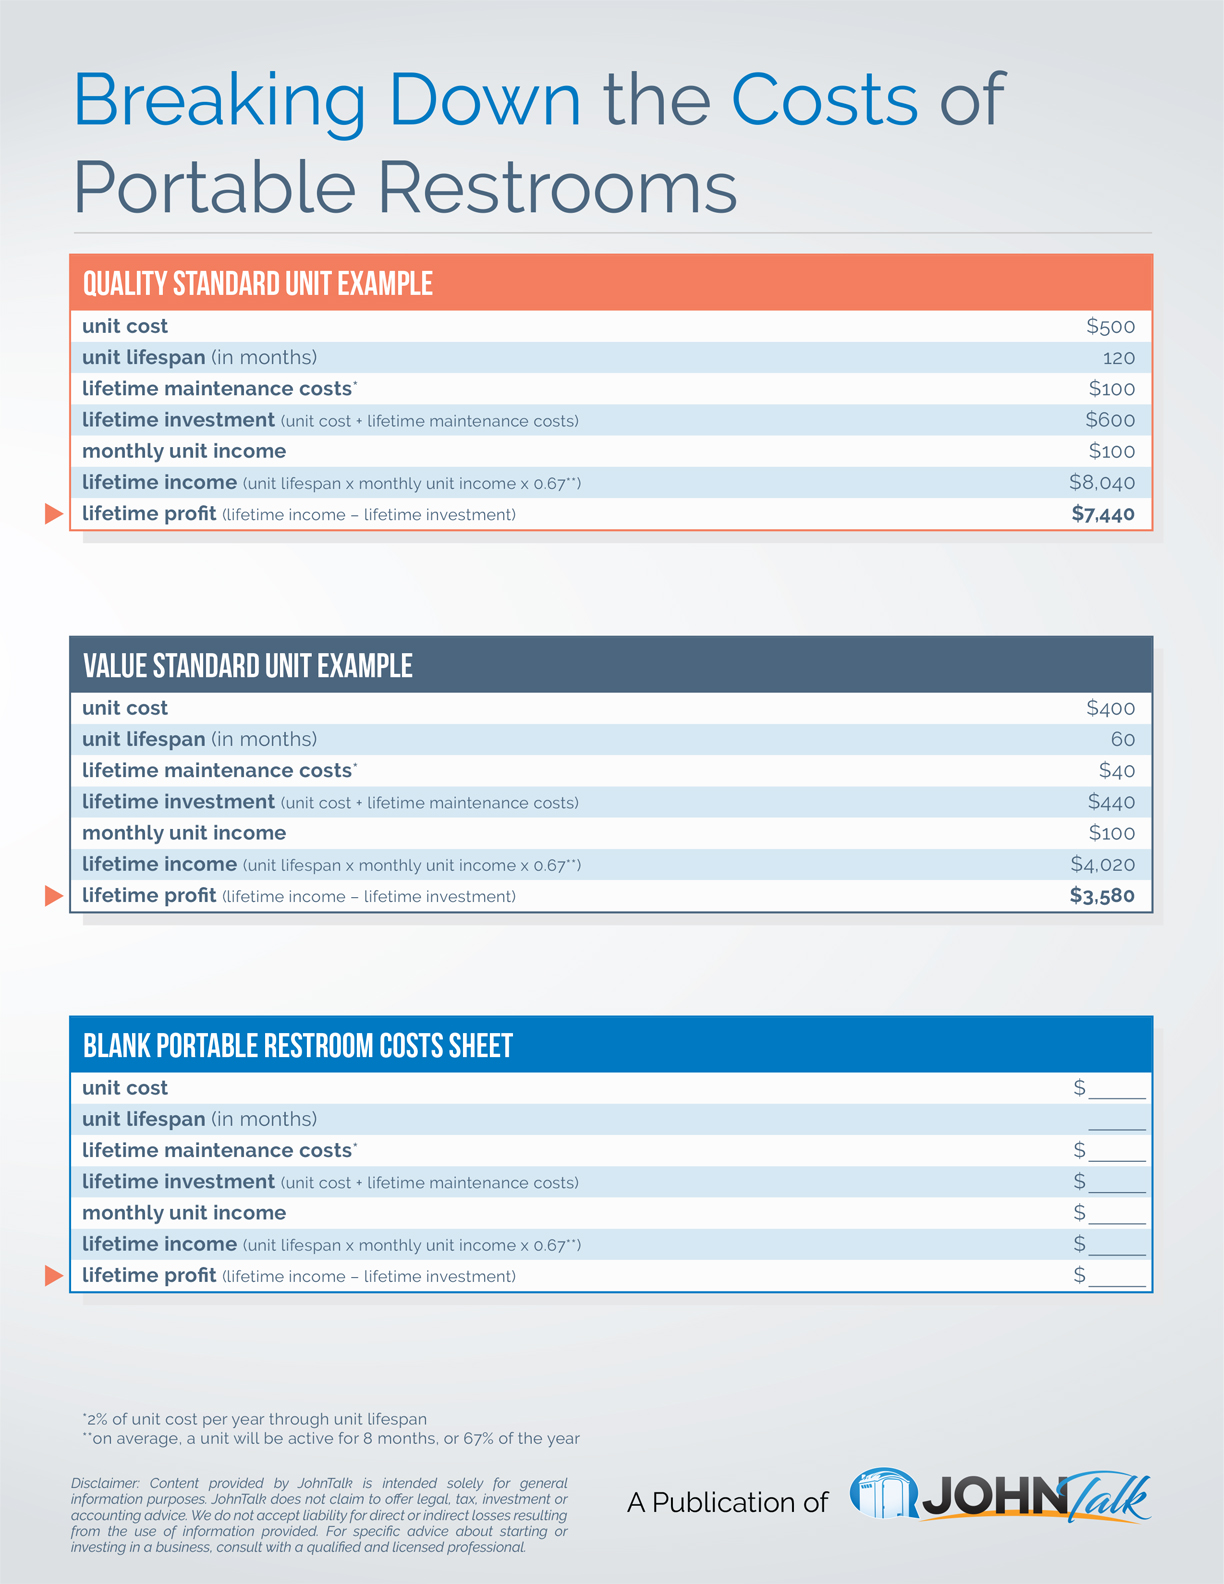 Breaking Down the Costs of Portable Restrooms